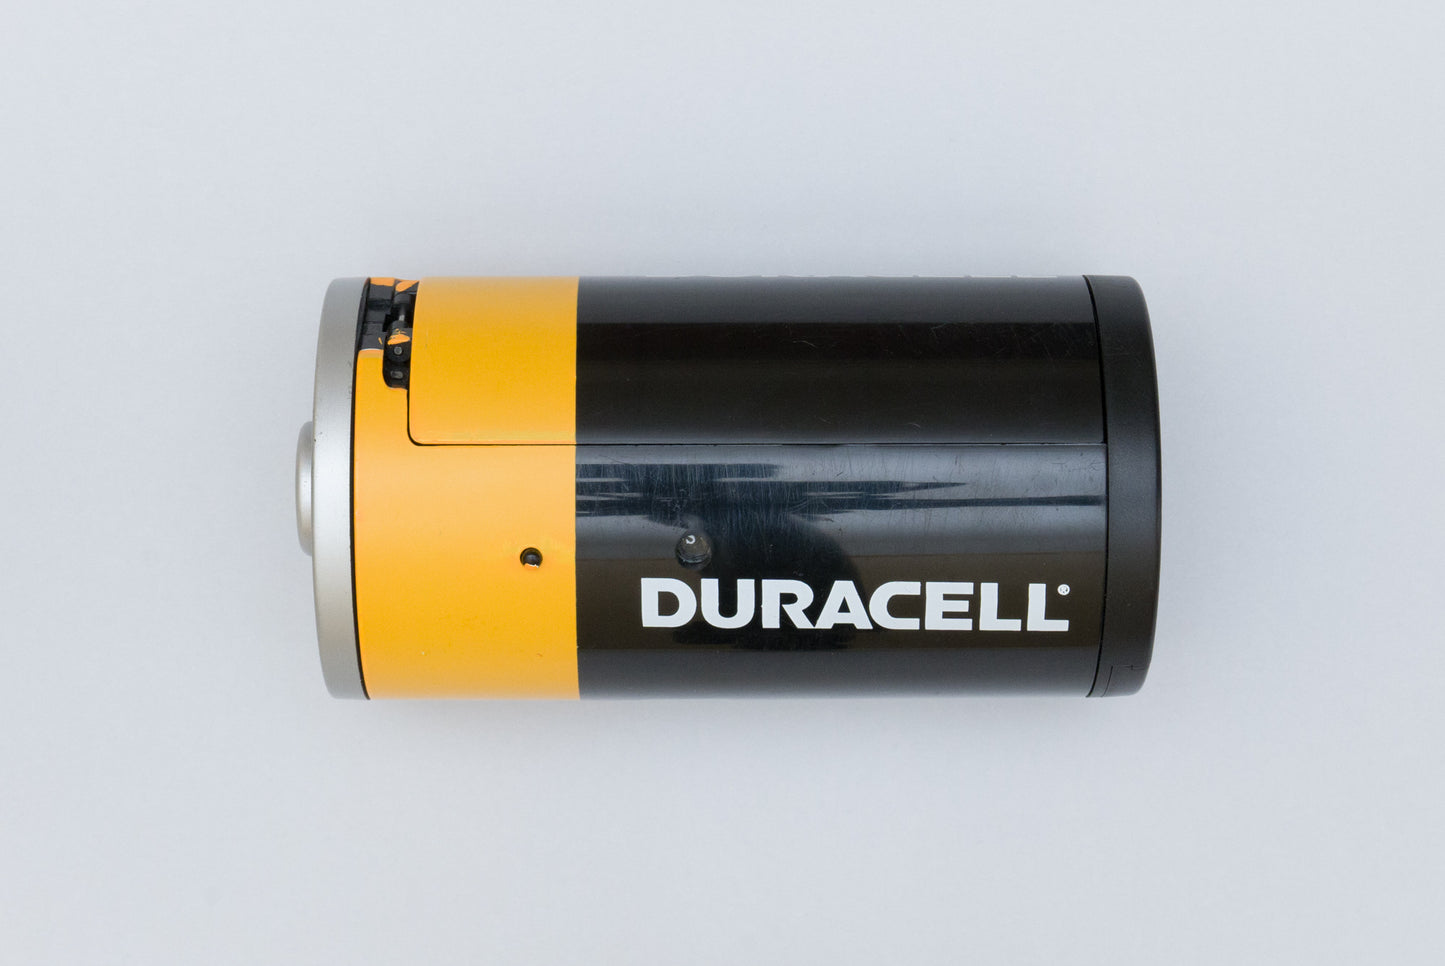 Duracell Battery Promo 35mm Film Camera